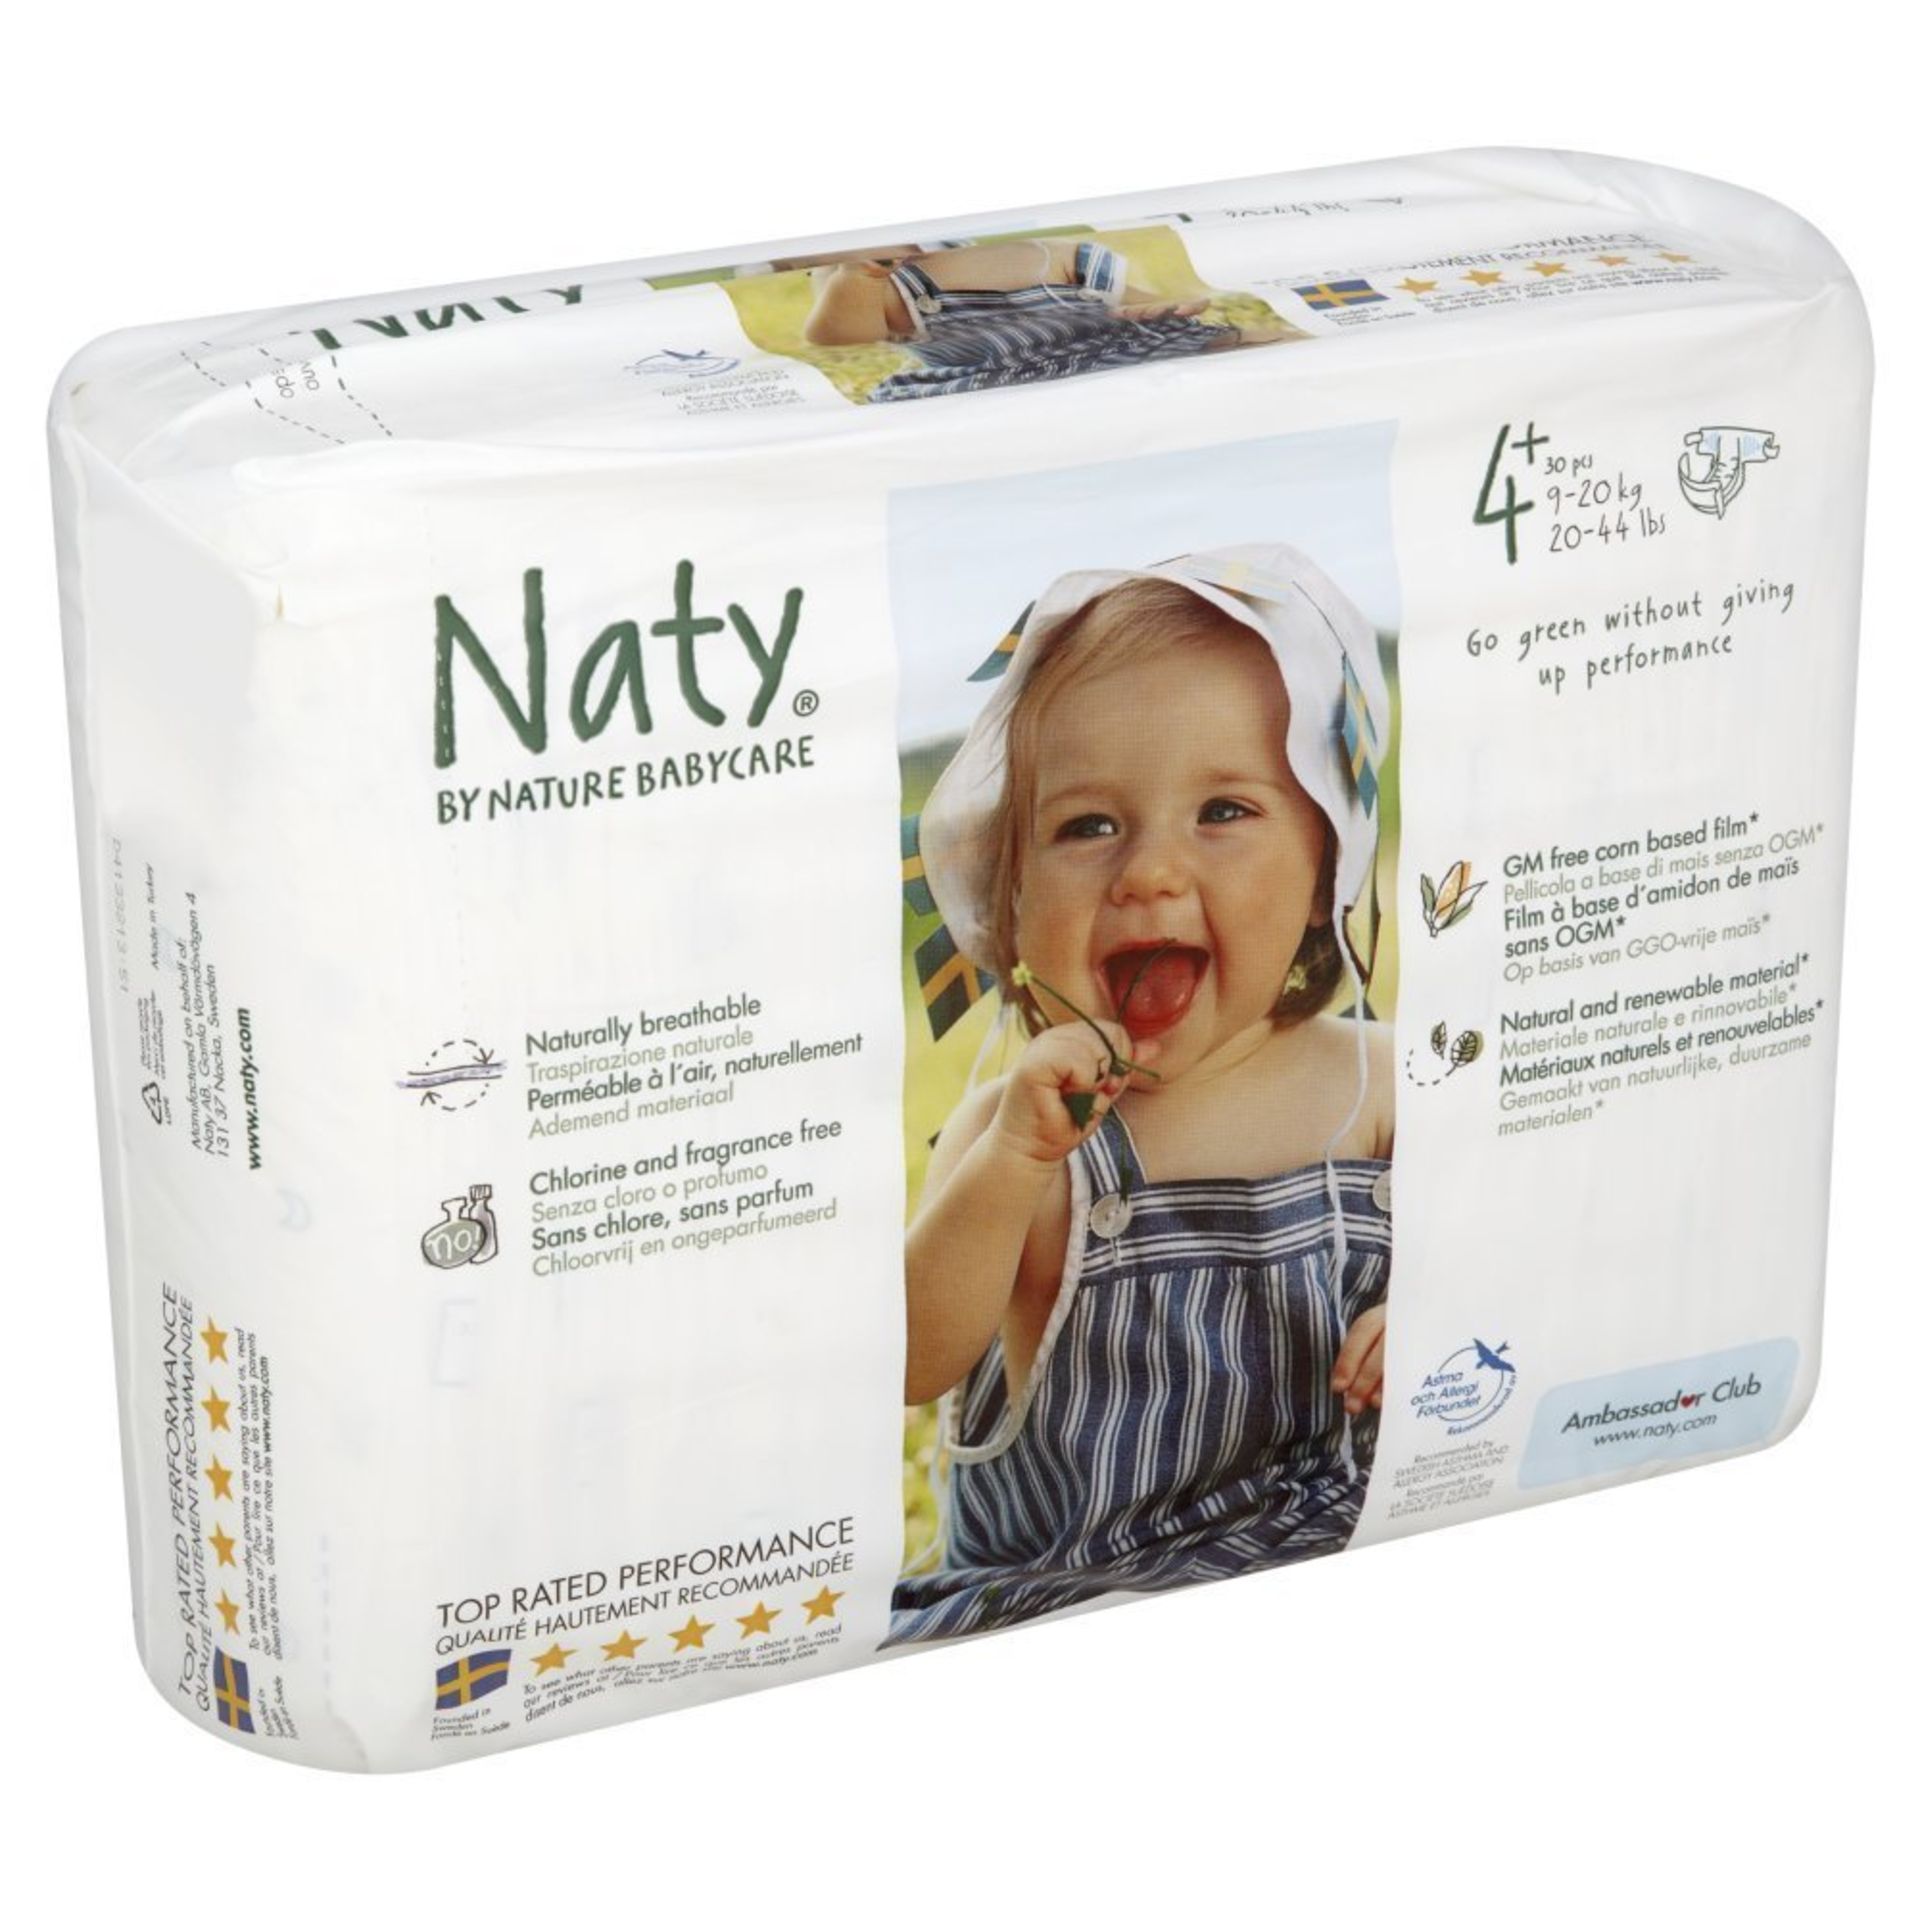 1 Box of 5 units , Containing Baby Products - Box Number 'BABY 240' - Latest AMZ price £77.3 - - Image 3 of 4